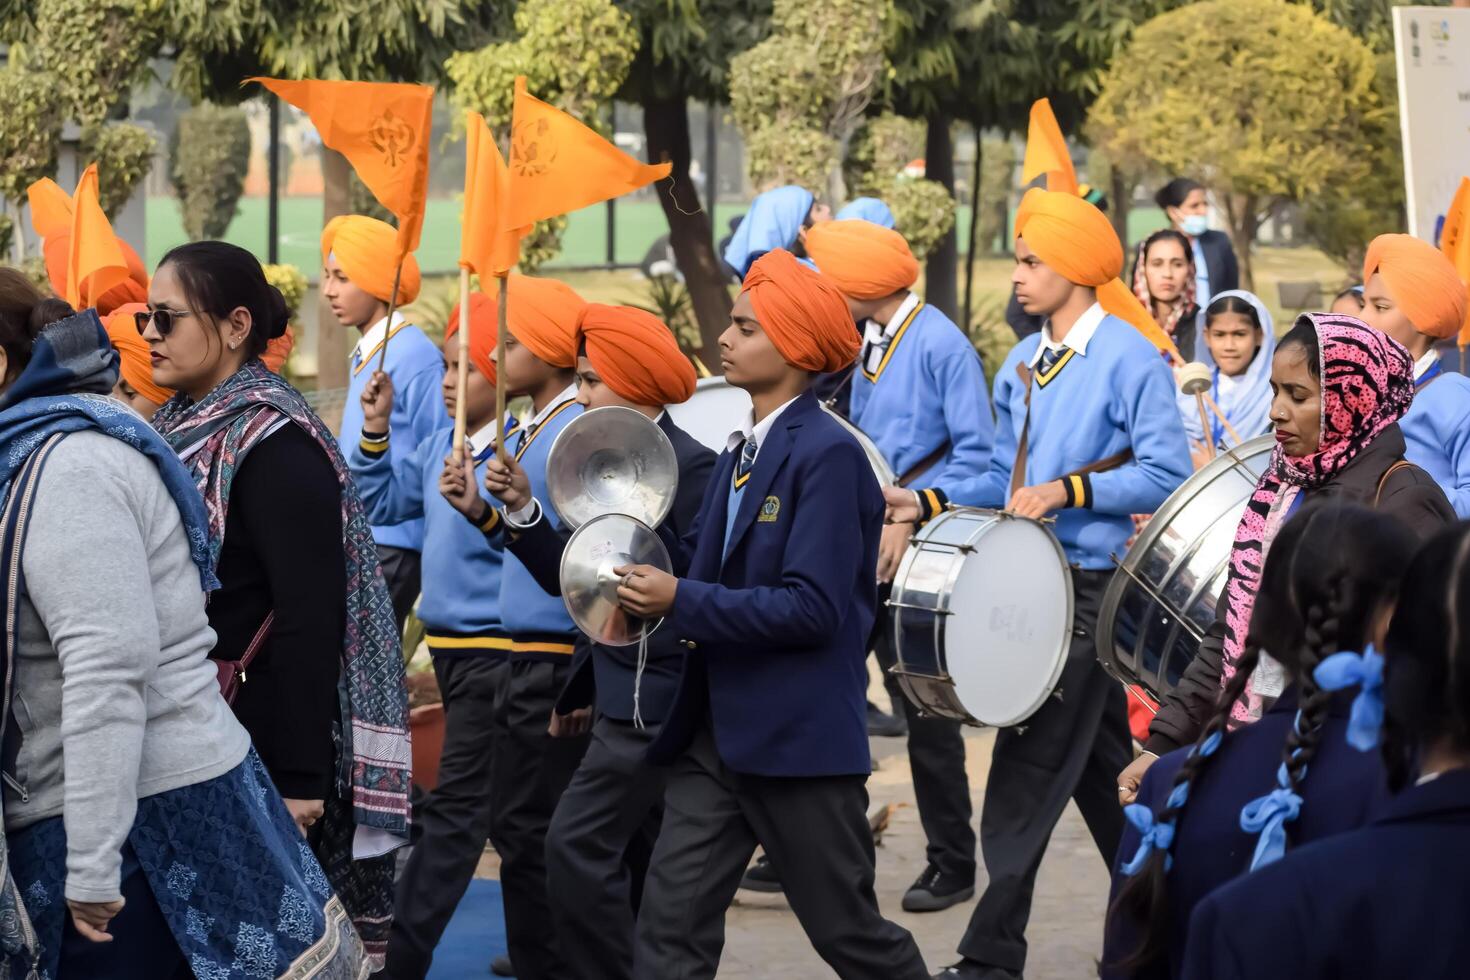 Delhi, India - December 26 2023 - Veer Bal Diwas commemorates the martyrdom of the four sons of tenth and last Sikh Guru Gobind Singh, In Jan 2021 PM Modi announced Dec 26 observed as Veer Bal Diwas photo